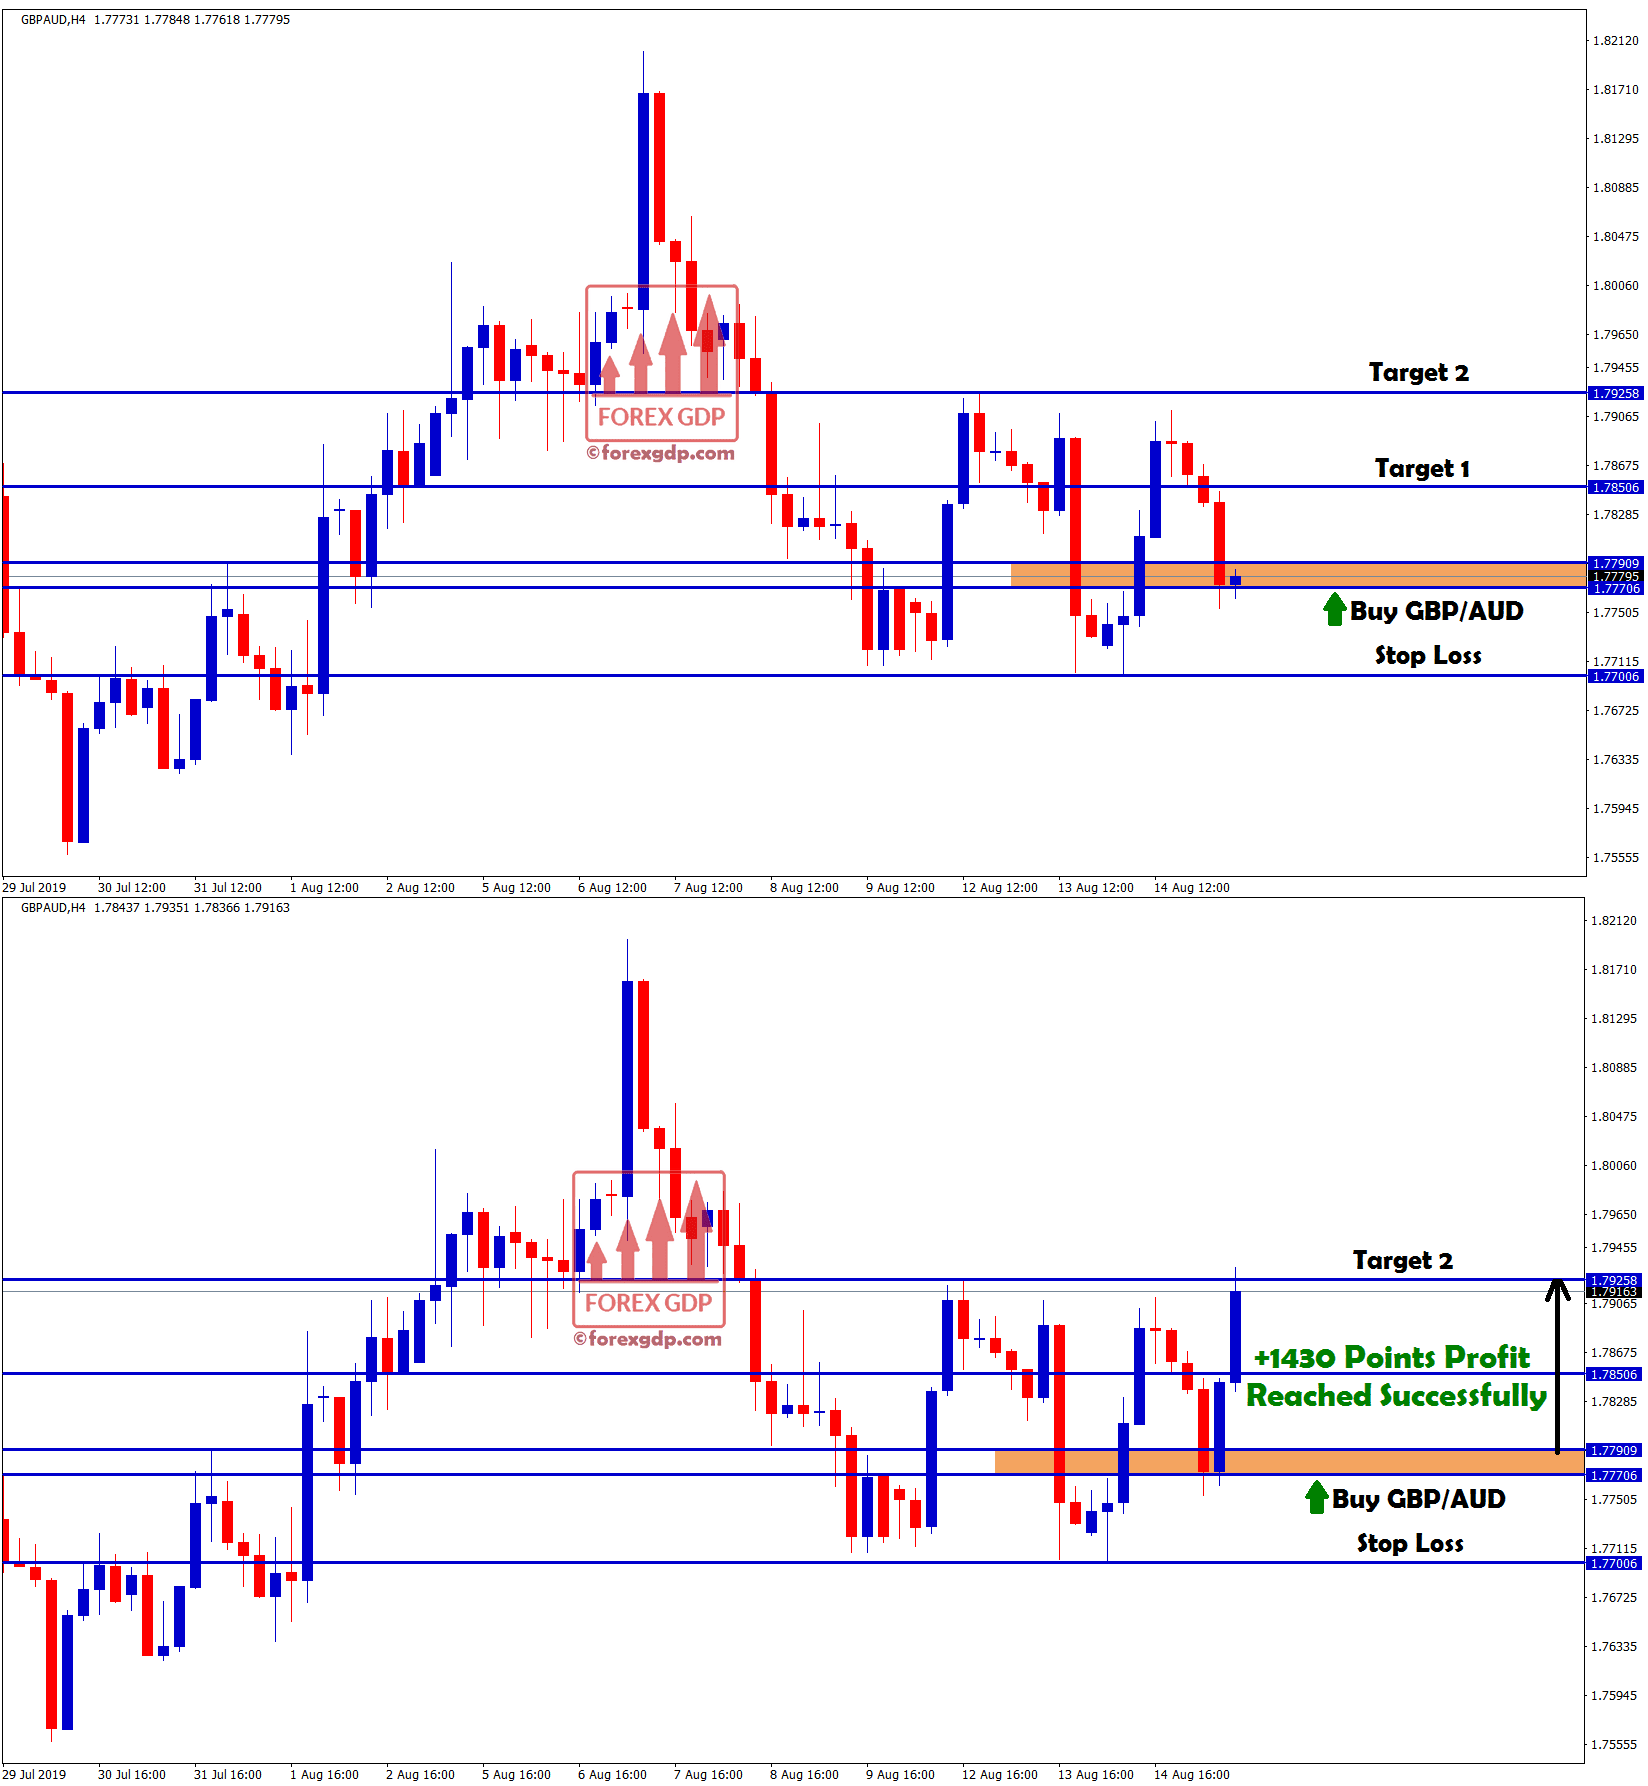 +143 pips profit made in gbp/aud buy signal